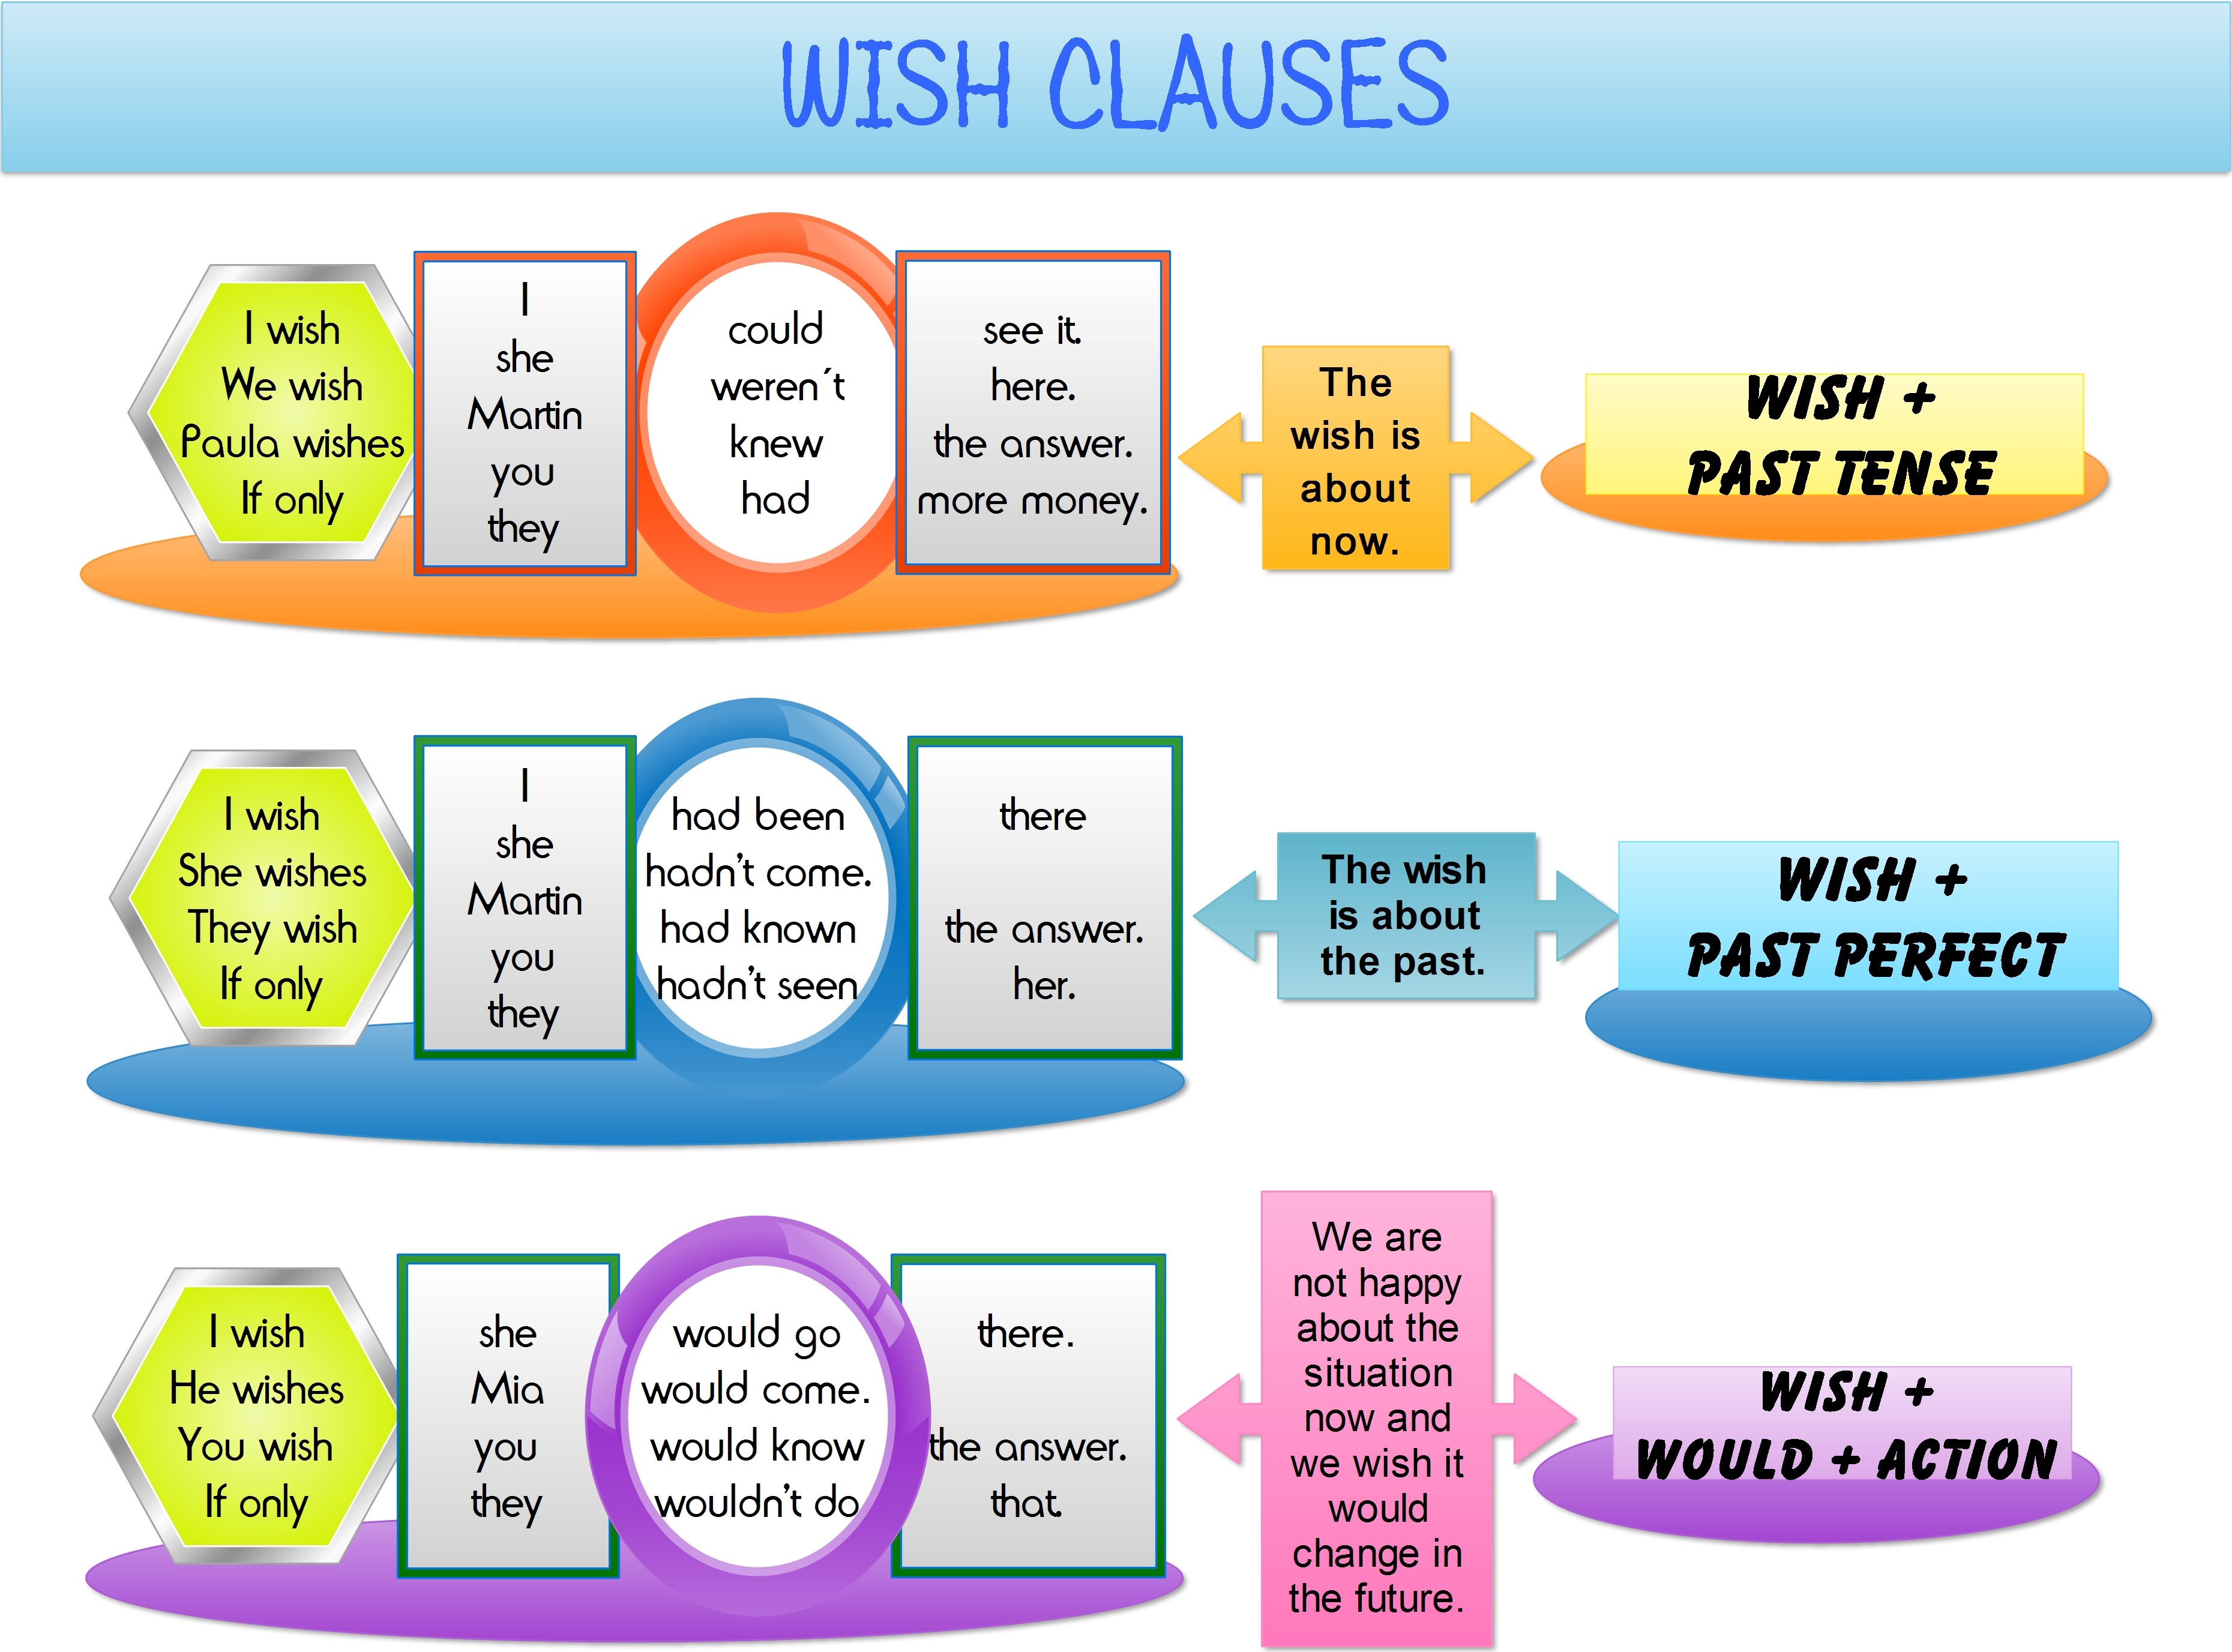 Wish clauses infographic